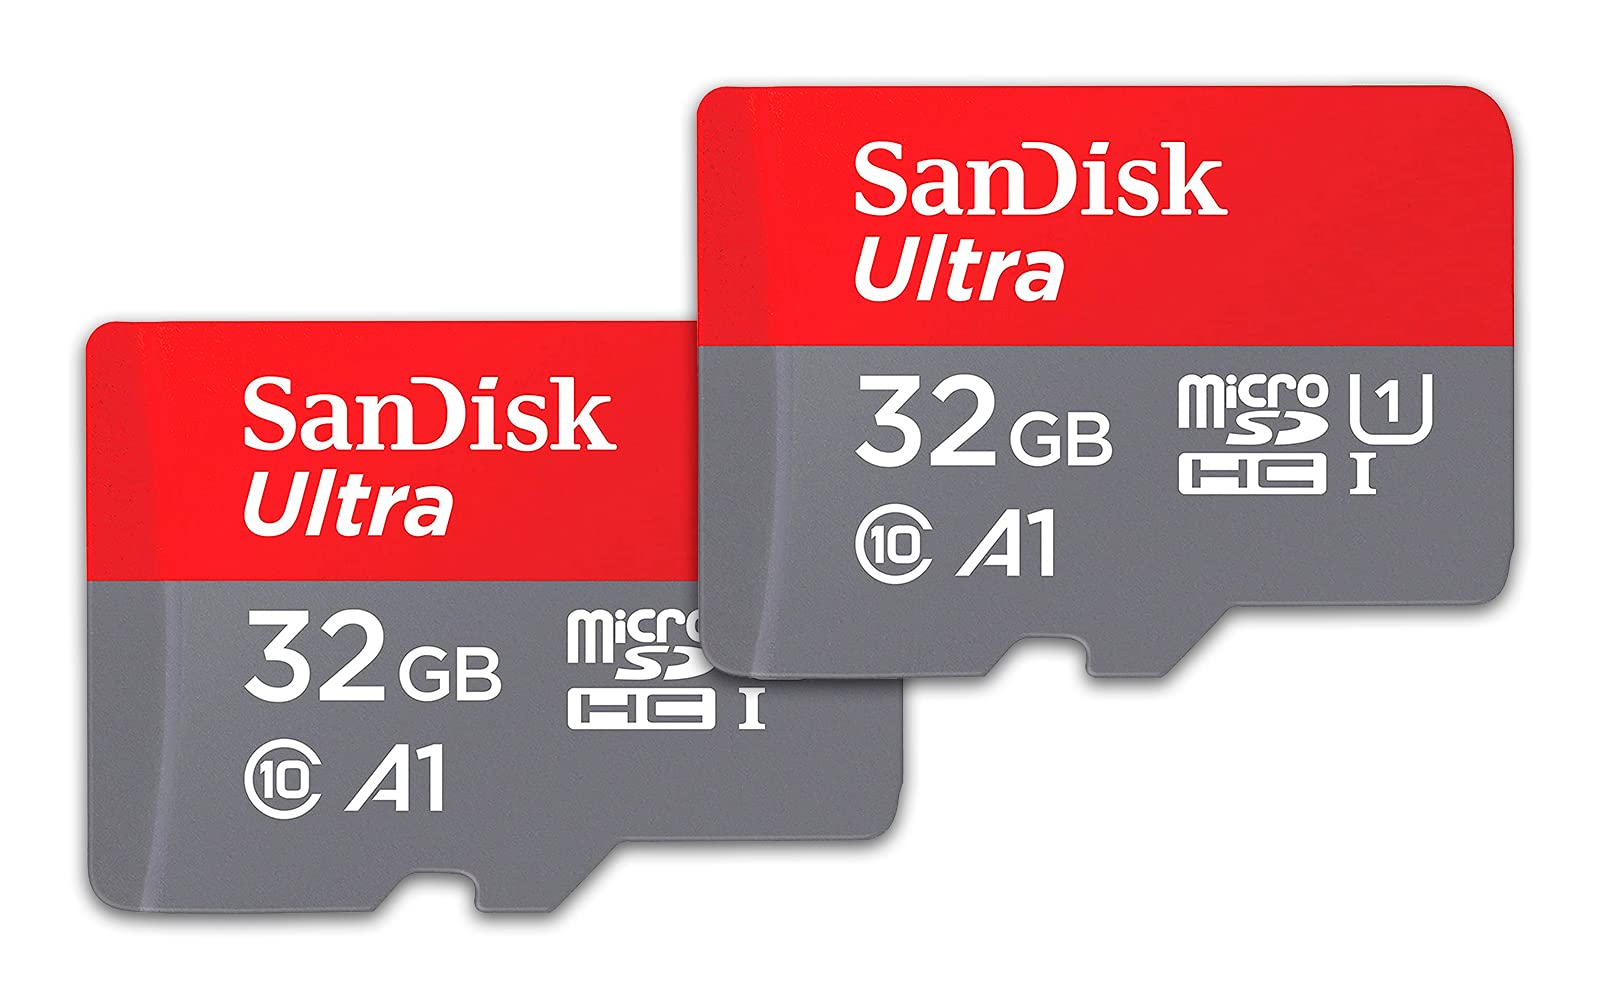 SanDisk 32GB (Pack of 2) Ultra microSDHC UHS-I Memory Card (2x32GB) with  Adapter - SDSQUA4-032G-GN6MT Previous Generation 32GB (2-Pack)